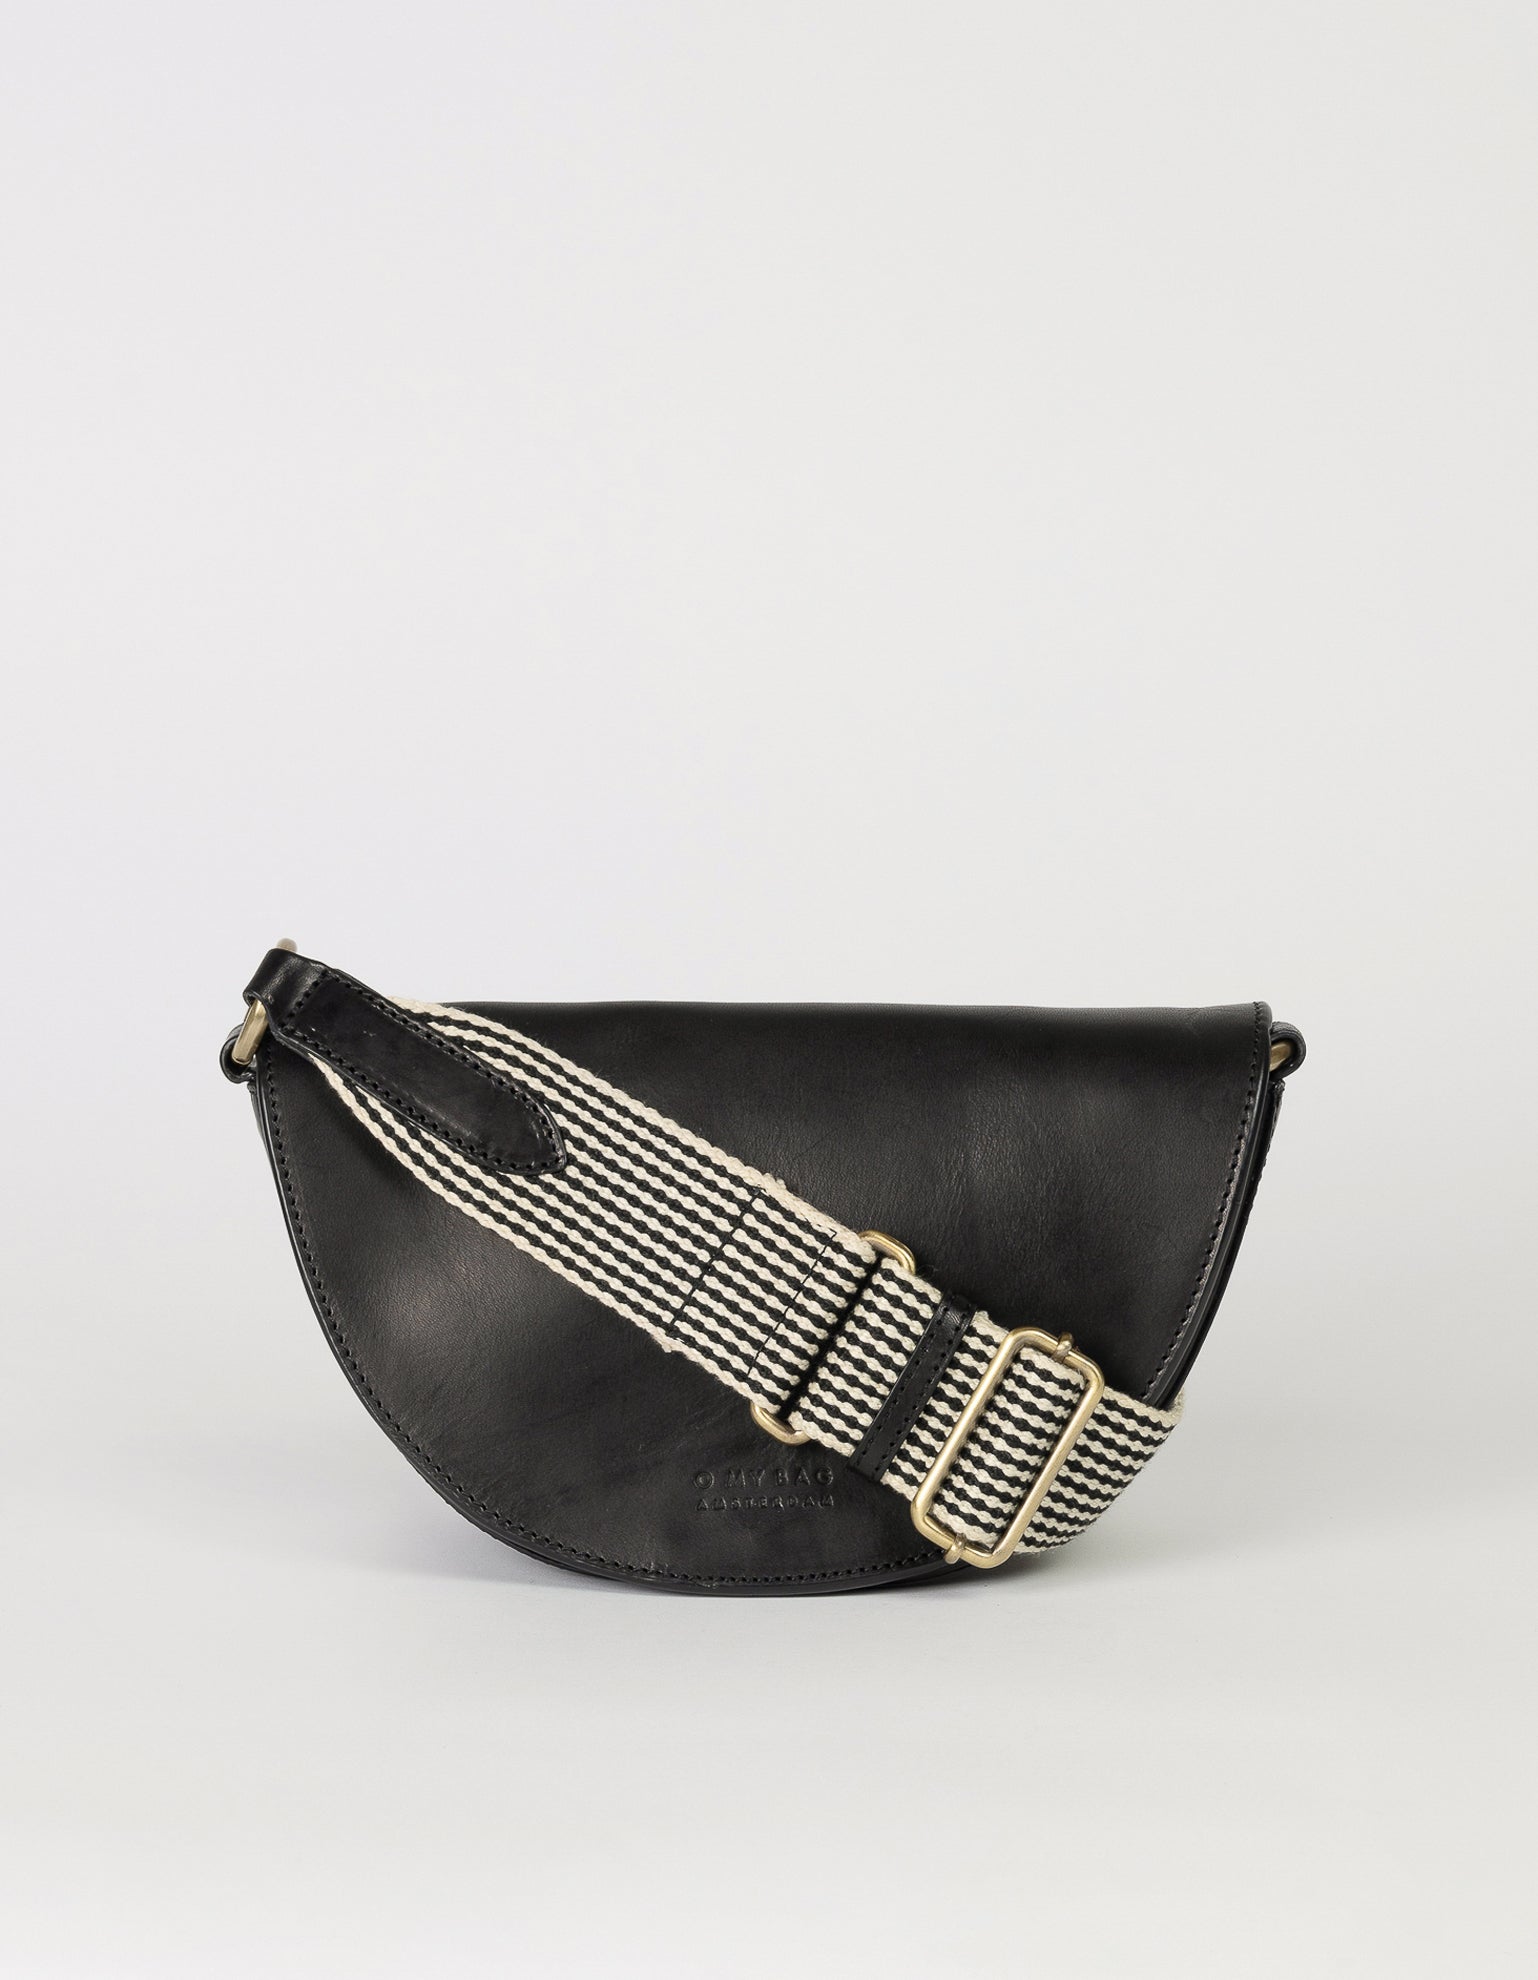 Elena Lera - Bags Made in Italy versatile and suitable